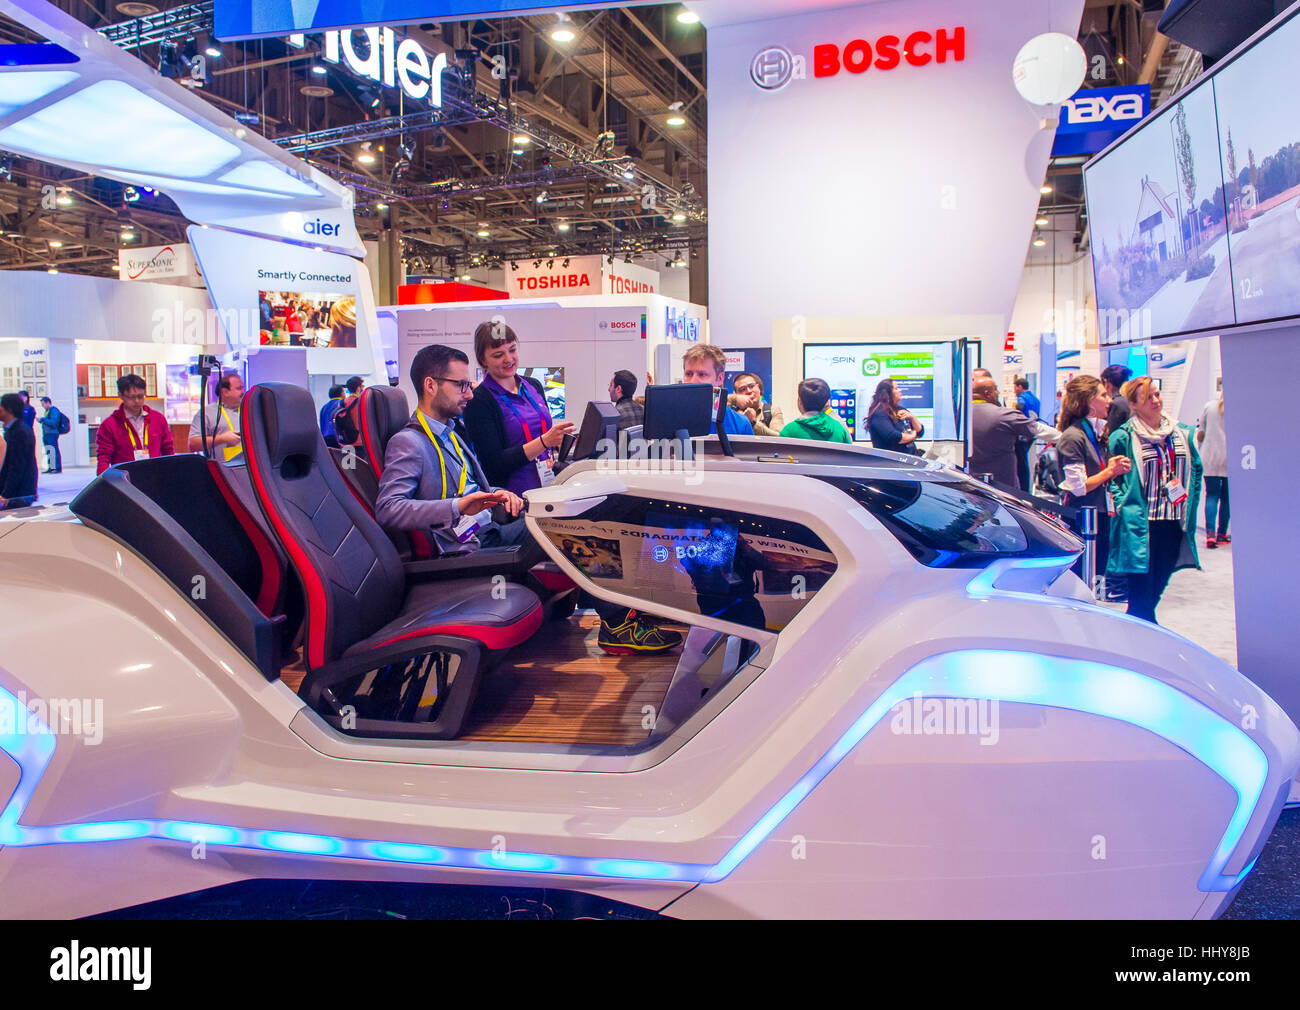 LAS VEGAS - JAN 08 : The Bosch booth at the CES show in Las Vegas on  January 08 2017 , CES is the world's leading consumer-electronics show  Stock Photo - Alamy